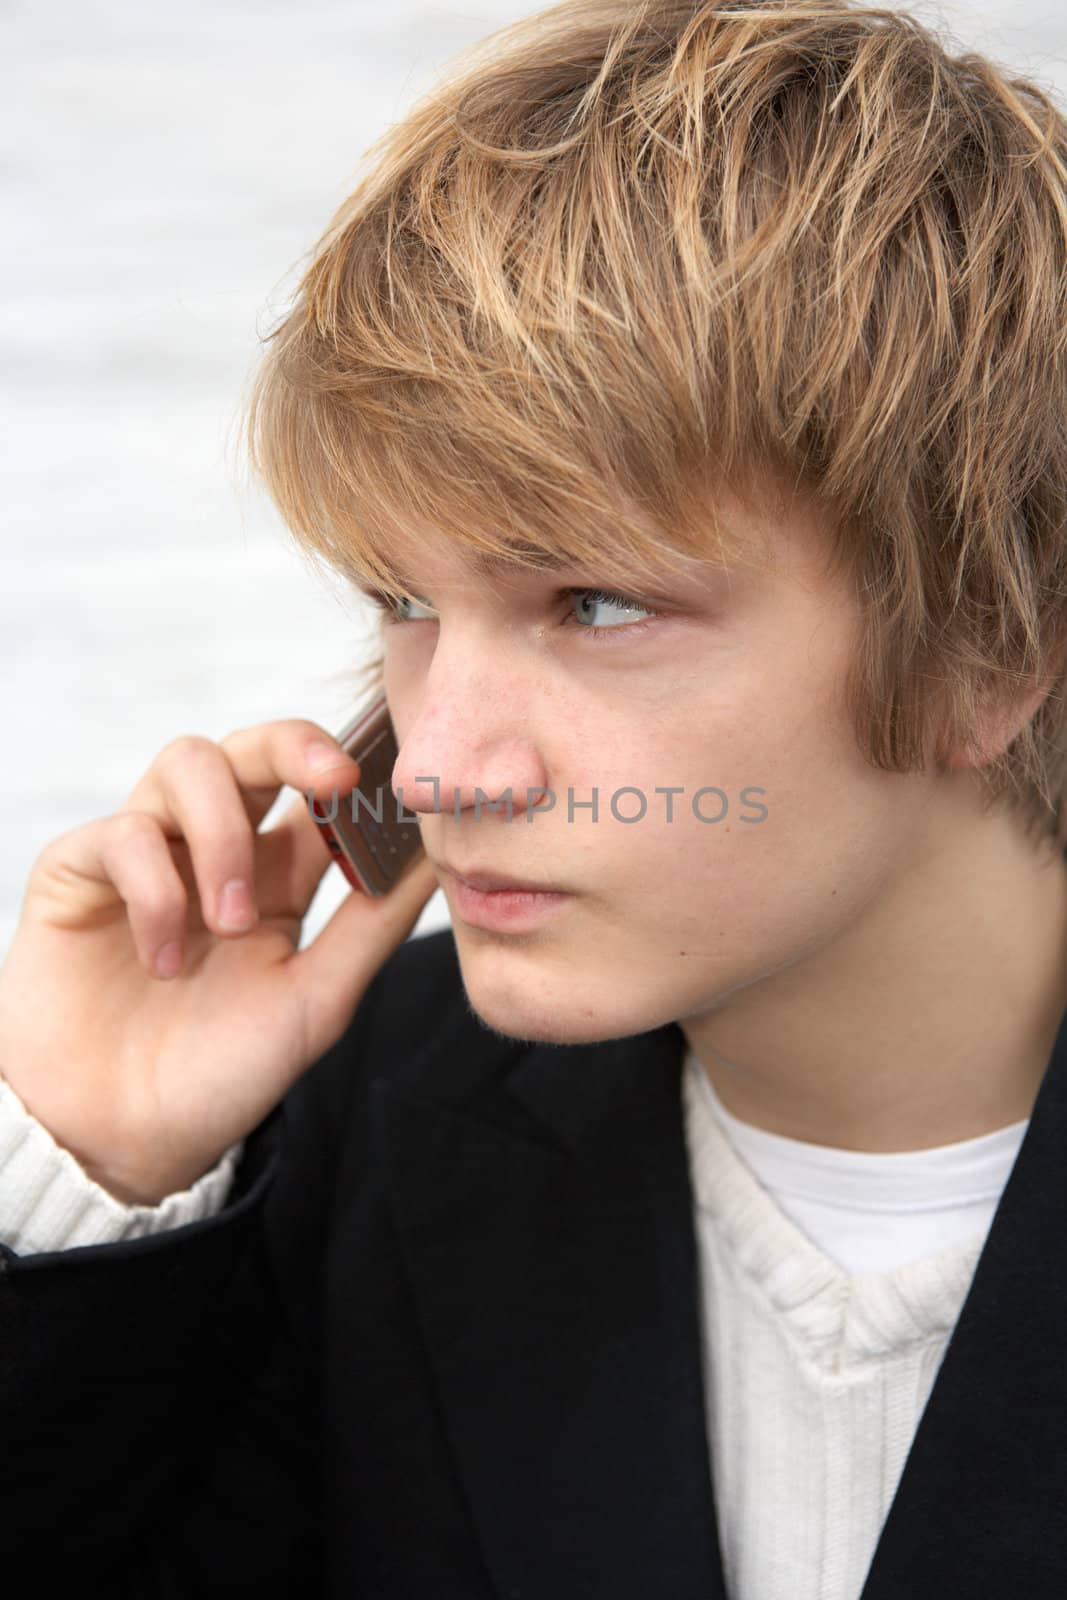 Teenage boy with mobile phone by white wall, close-up